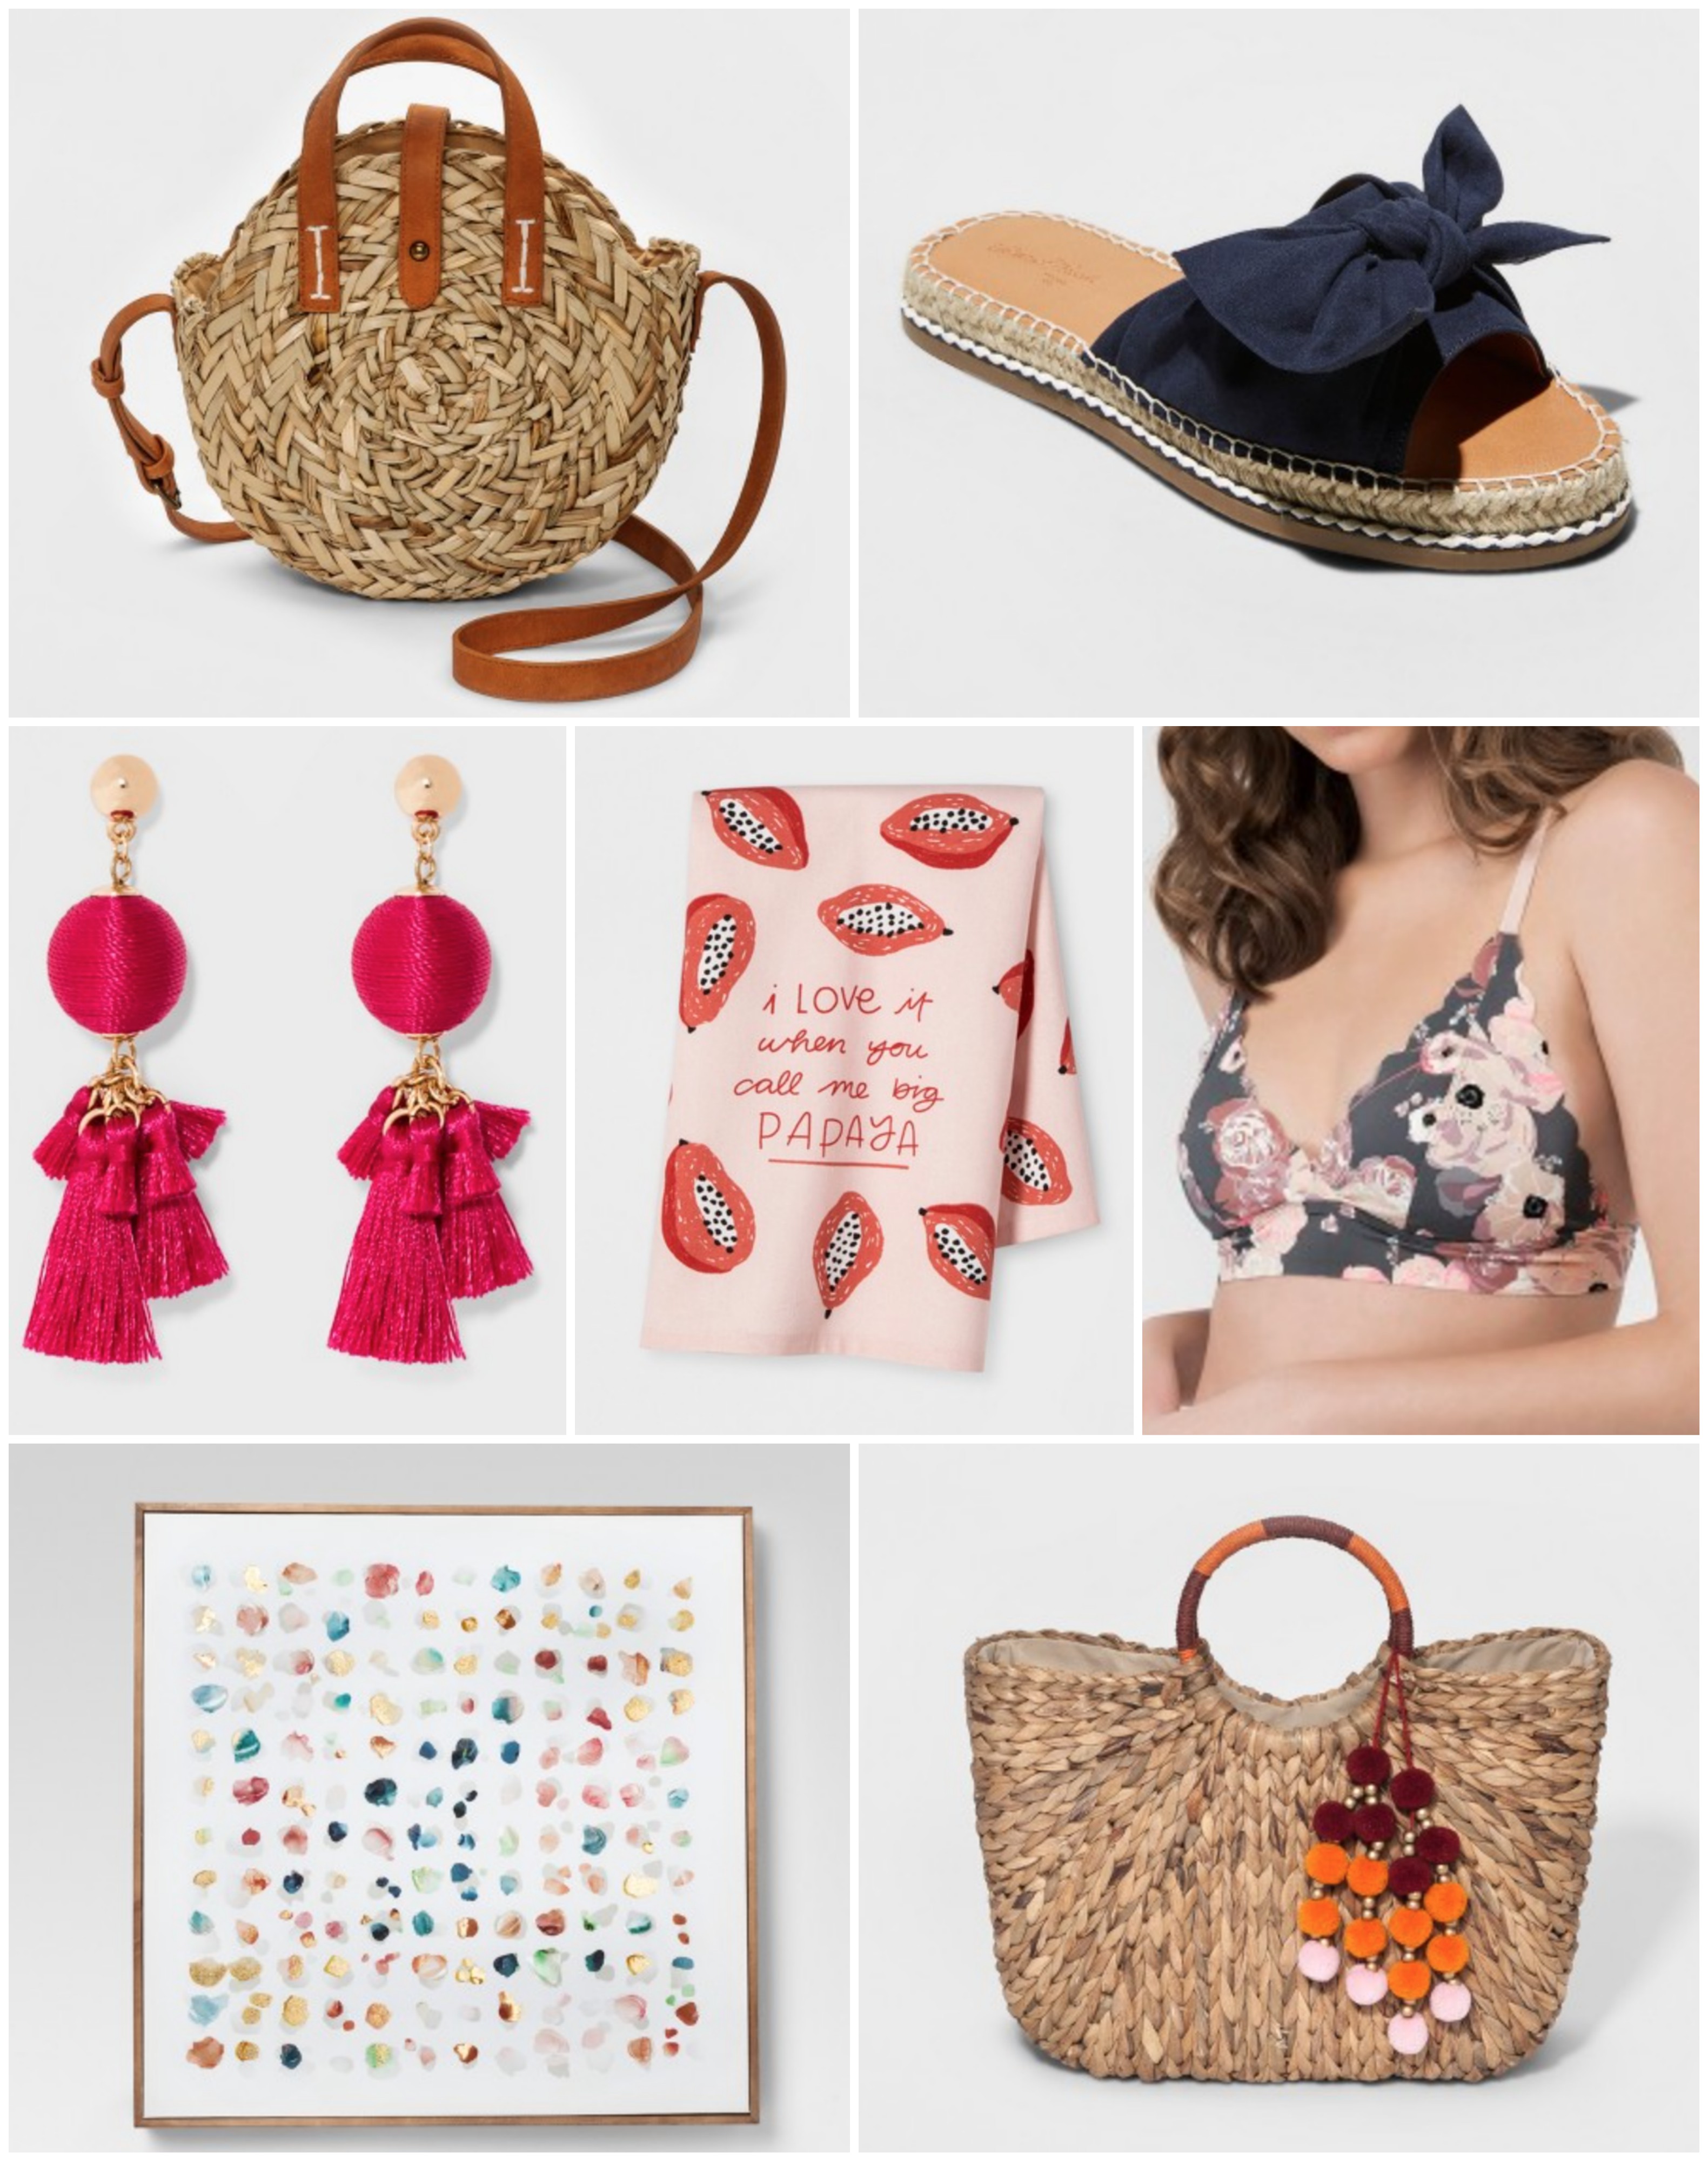 7 Target Finds I Can't Stop Thinking About - Target Shopping - Summer 2018 - Communikait by Kait Hanson